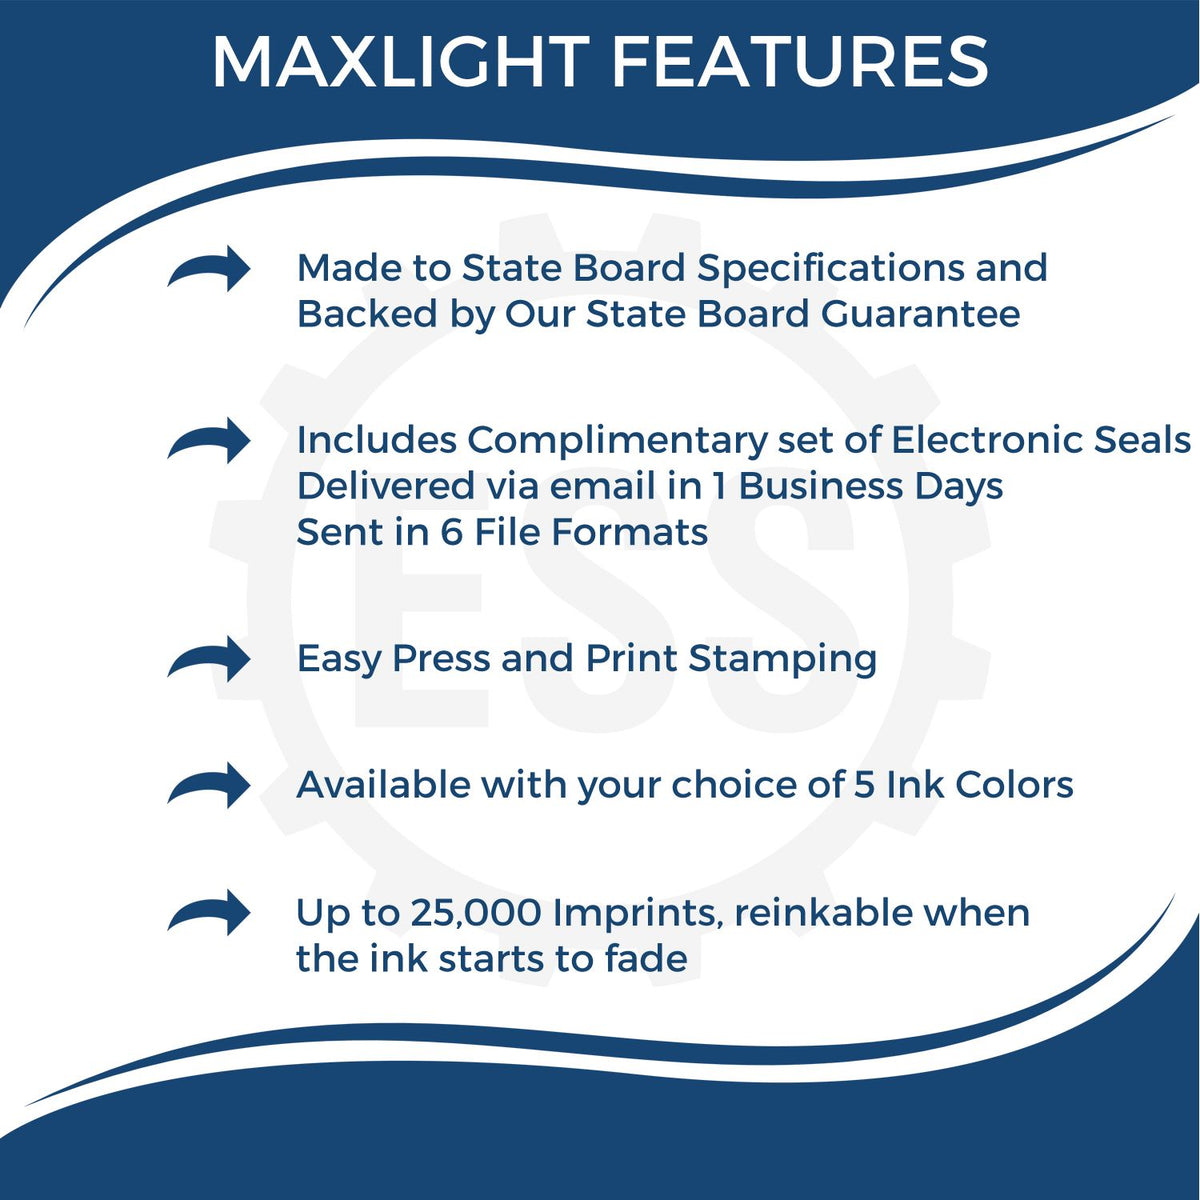 A picture of an infographic highlighting the selling points for the MaxLight Premium Pre-Inked Alaska State Seal Notarial Stamp